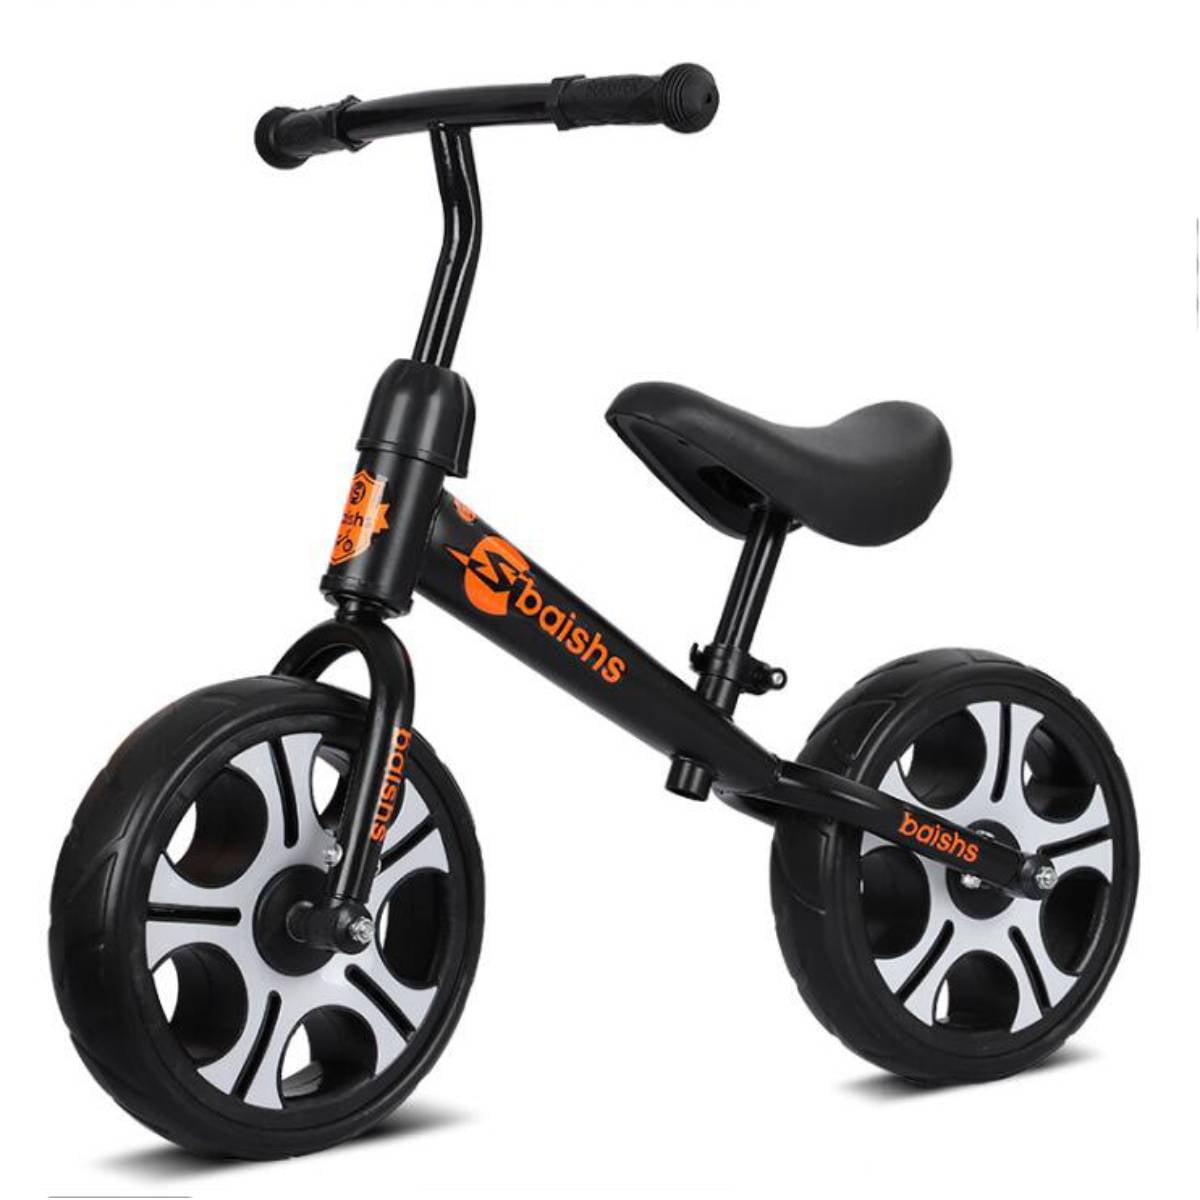 14 Inch Kids Balance Bike,No Pedal Lightweight Bicycle,With Adjustable Seat Handlebar,Toys For Children 3-7 Years,Boys Girls Gift,Max 45 Kg,Multiple Colors 